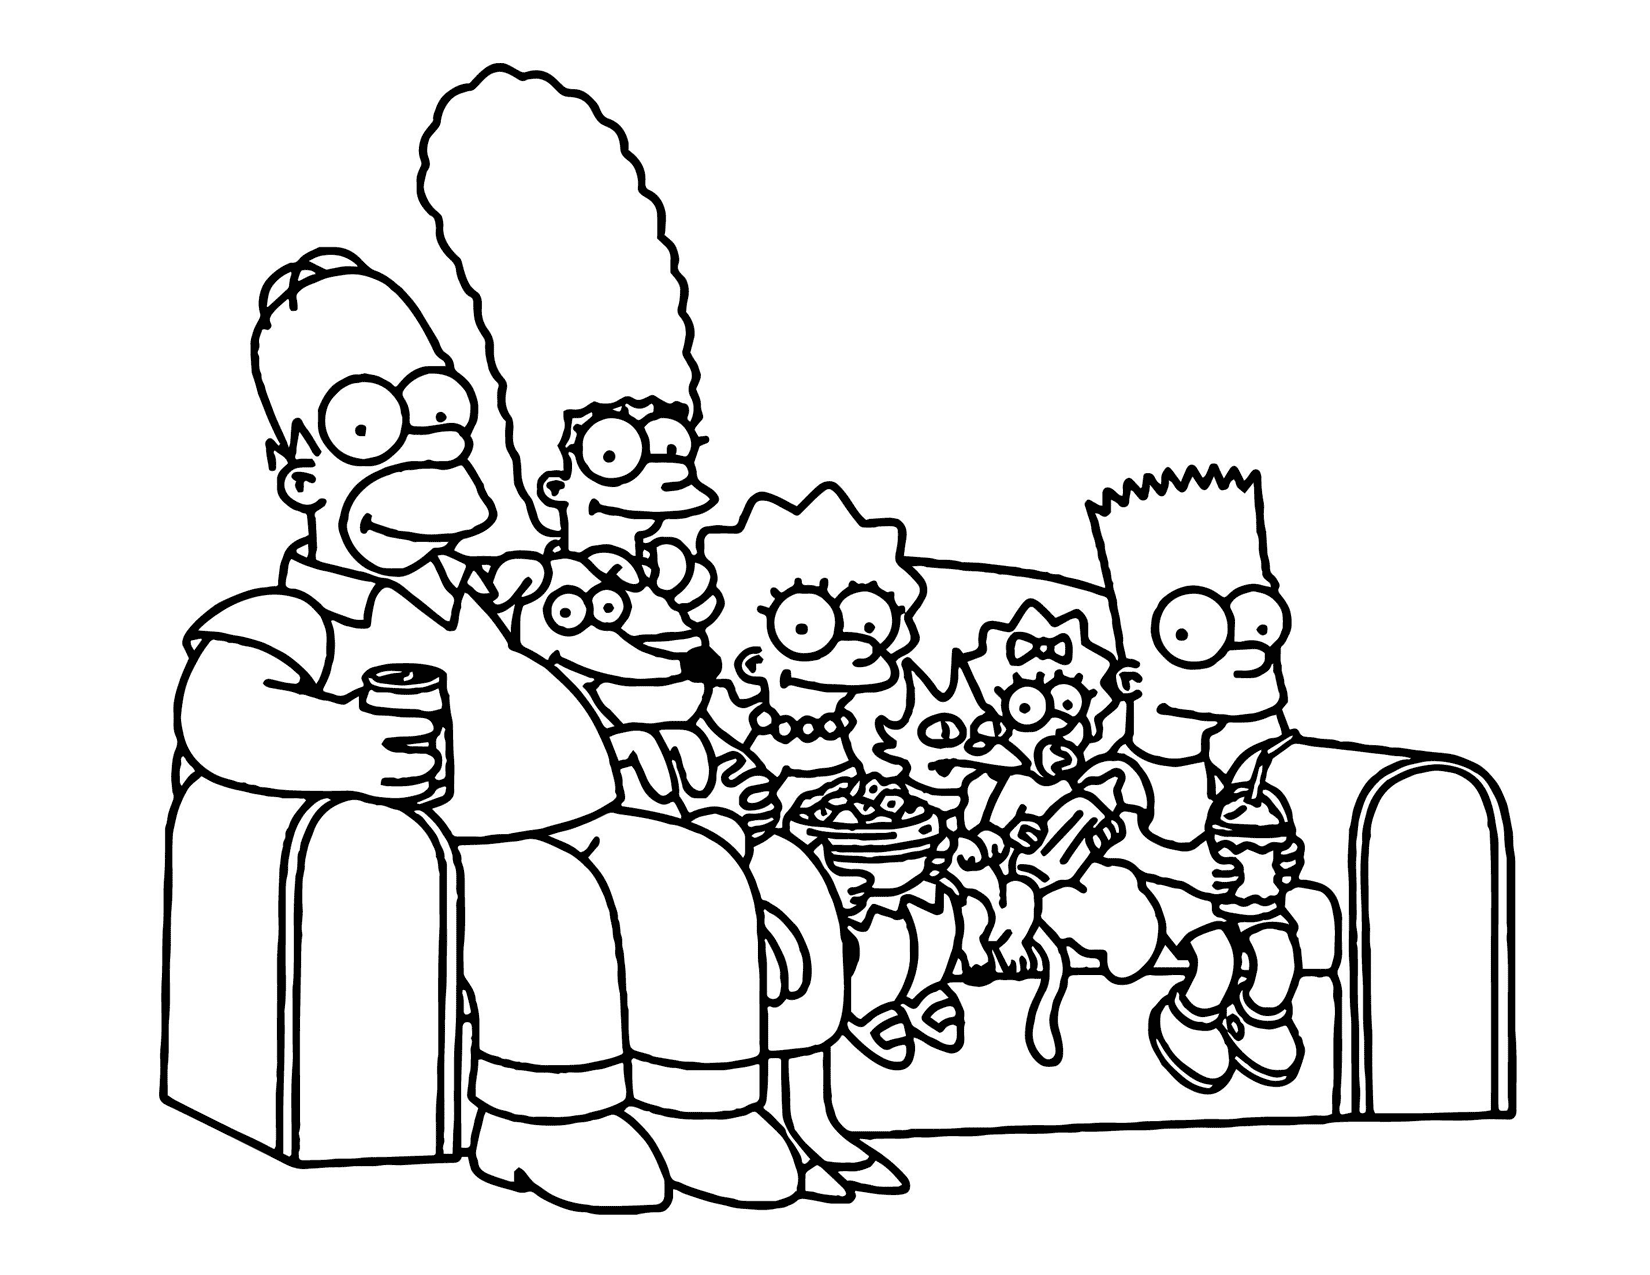 Simpsons Family On The Couch Coloring Page